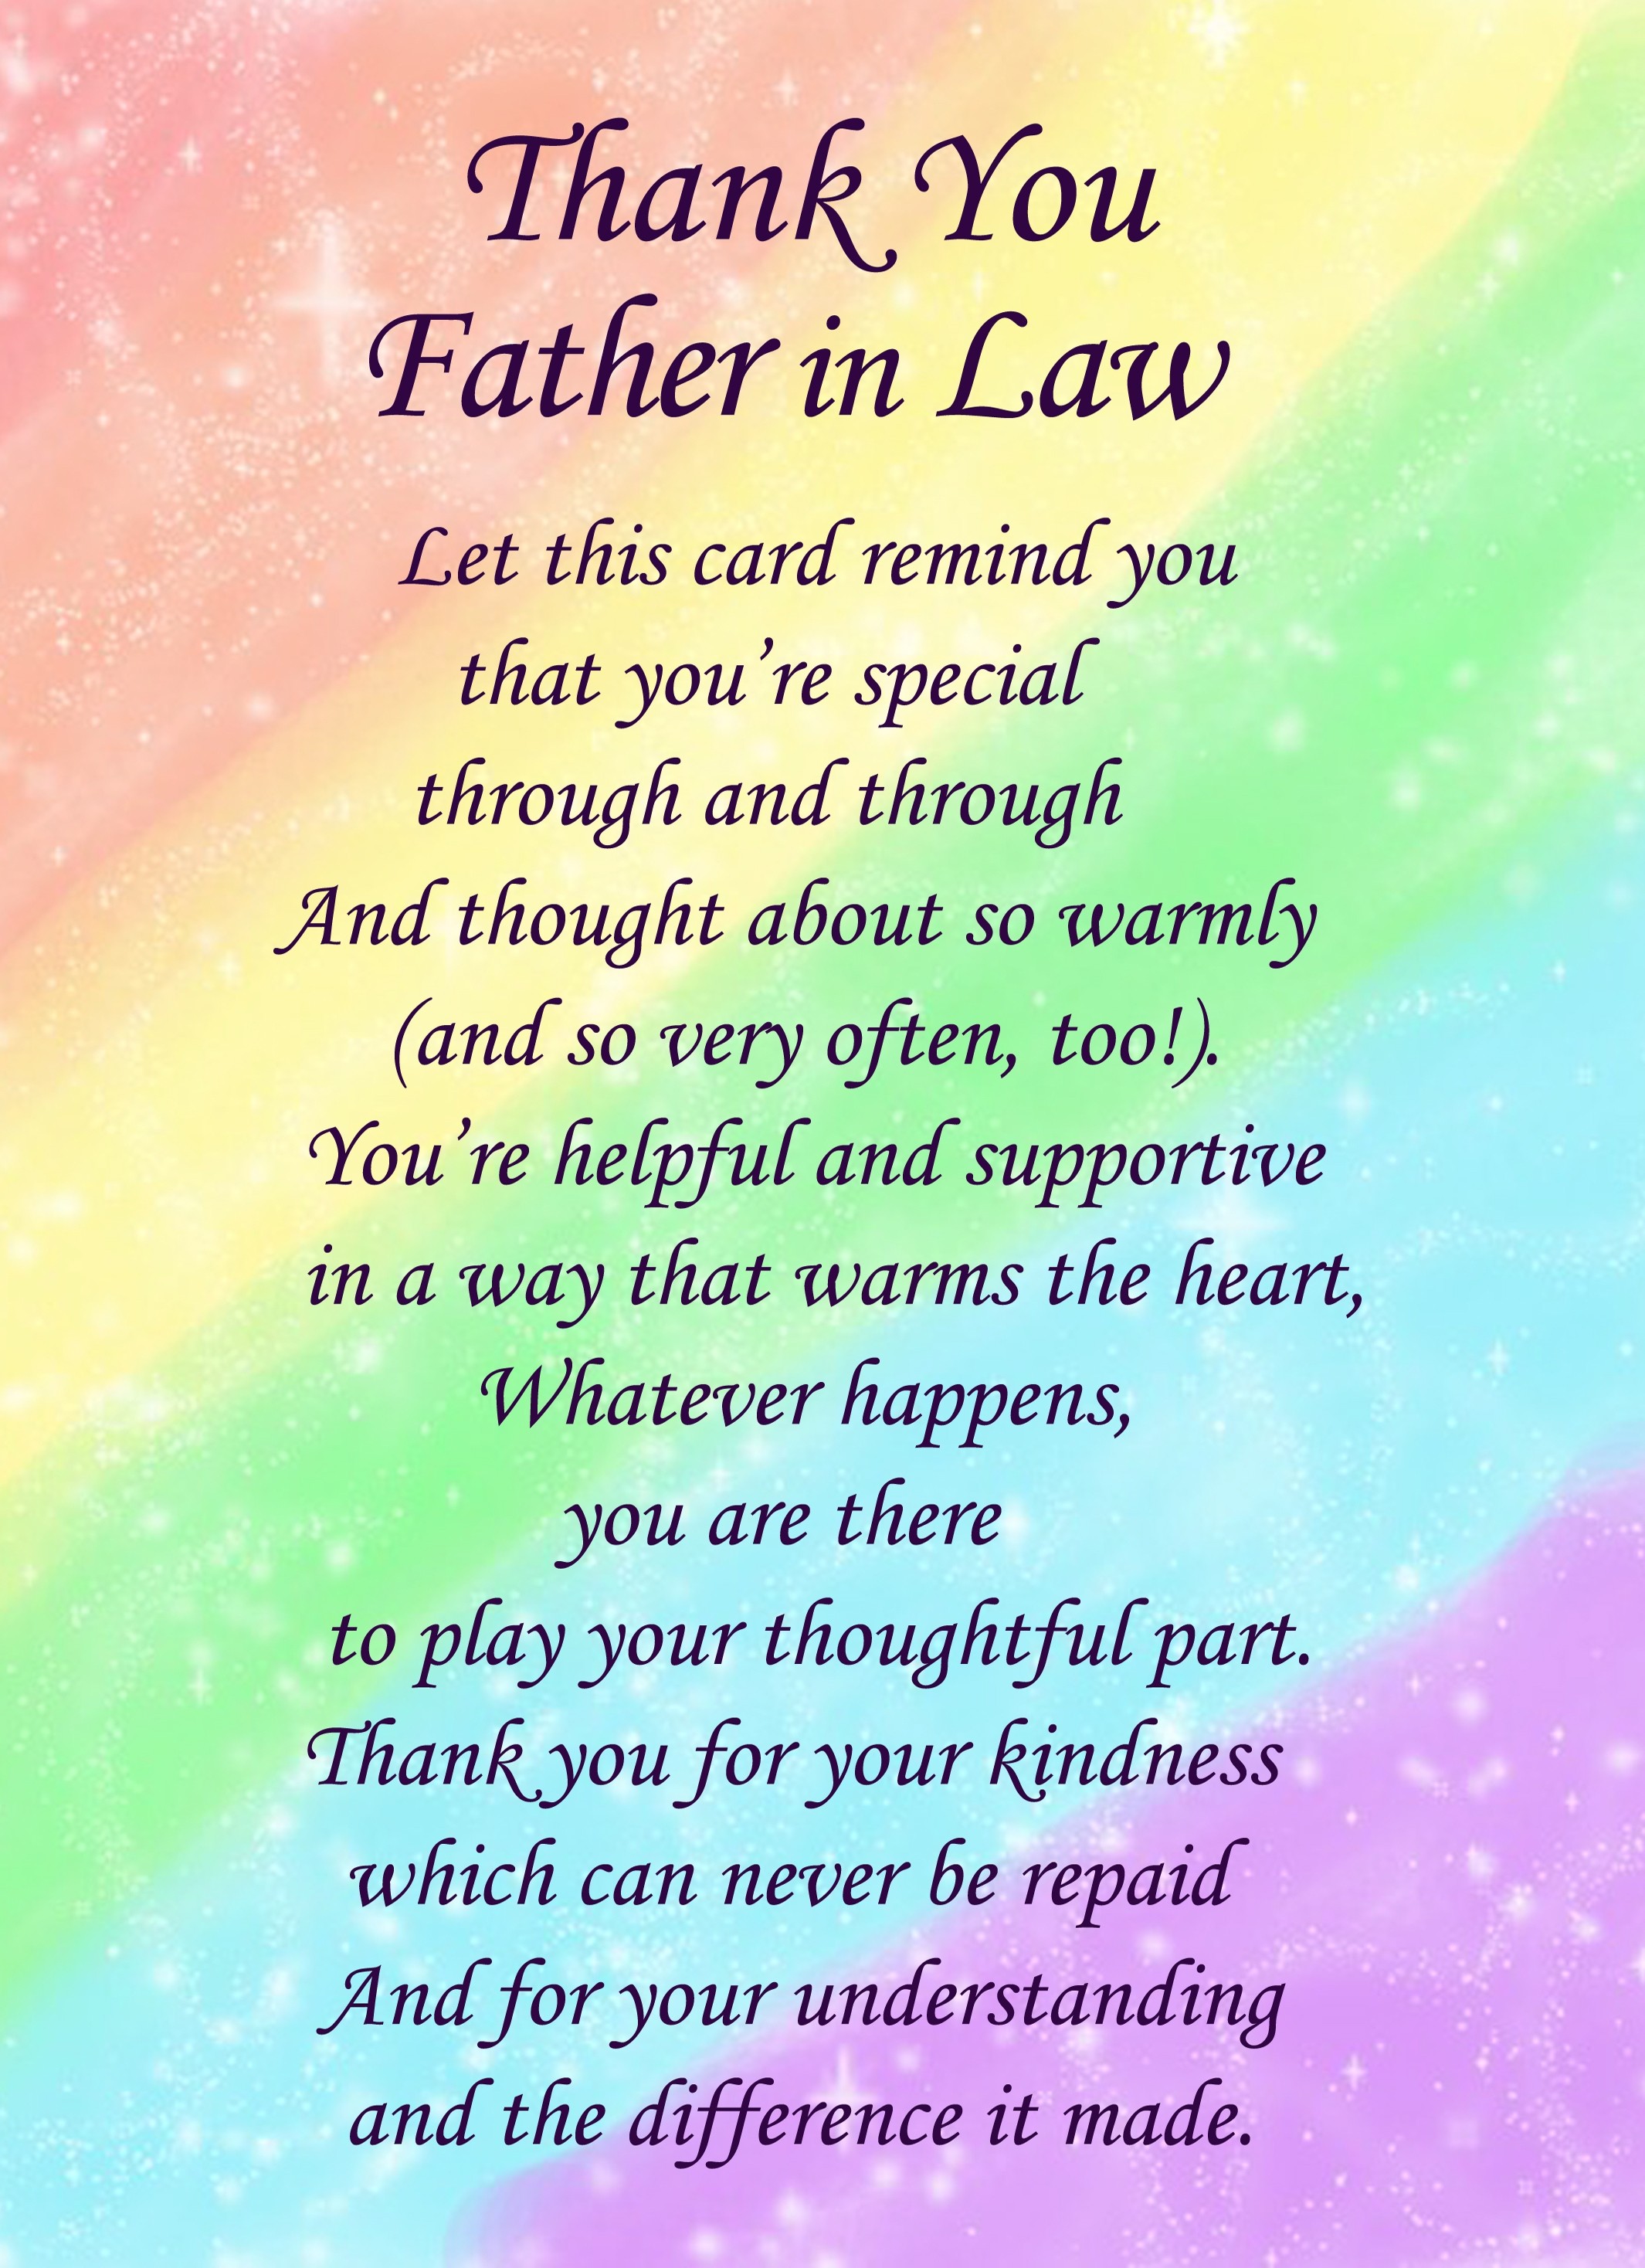 Thank You 'Father in Law' Poem Verse Greeting Card